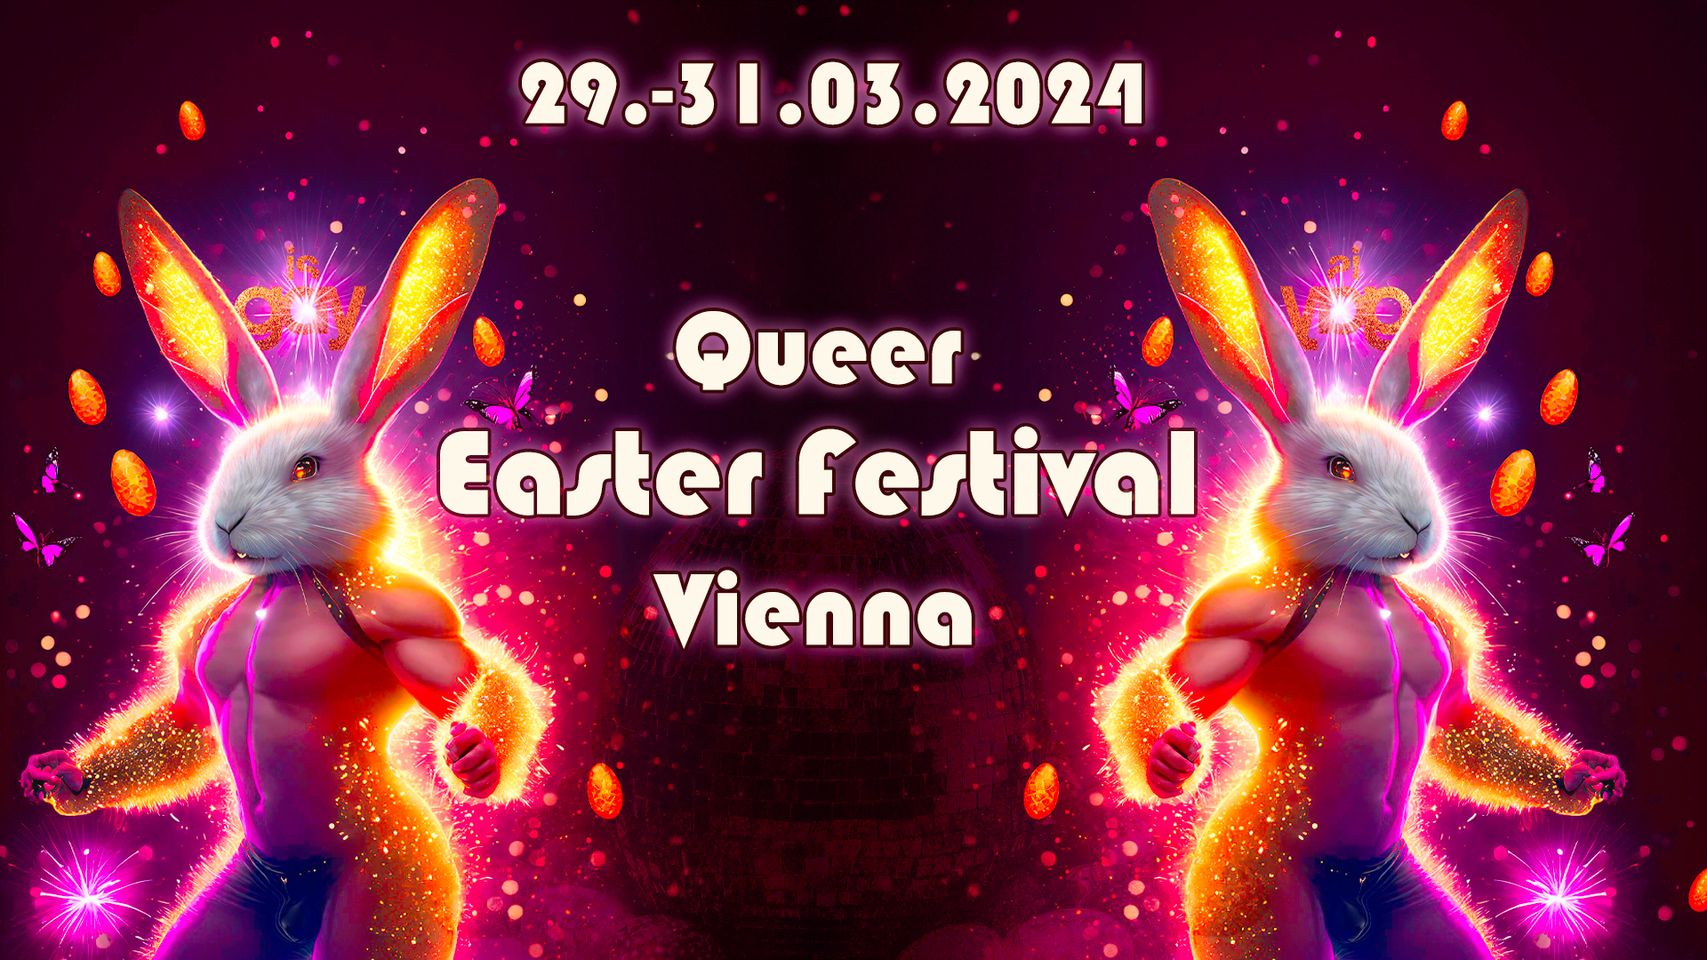 Queer Easter Festival Vienna am 29. March 2024 @ Camera Club.